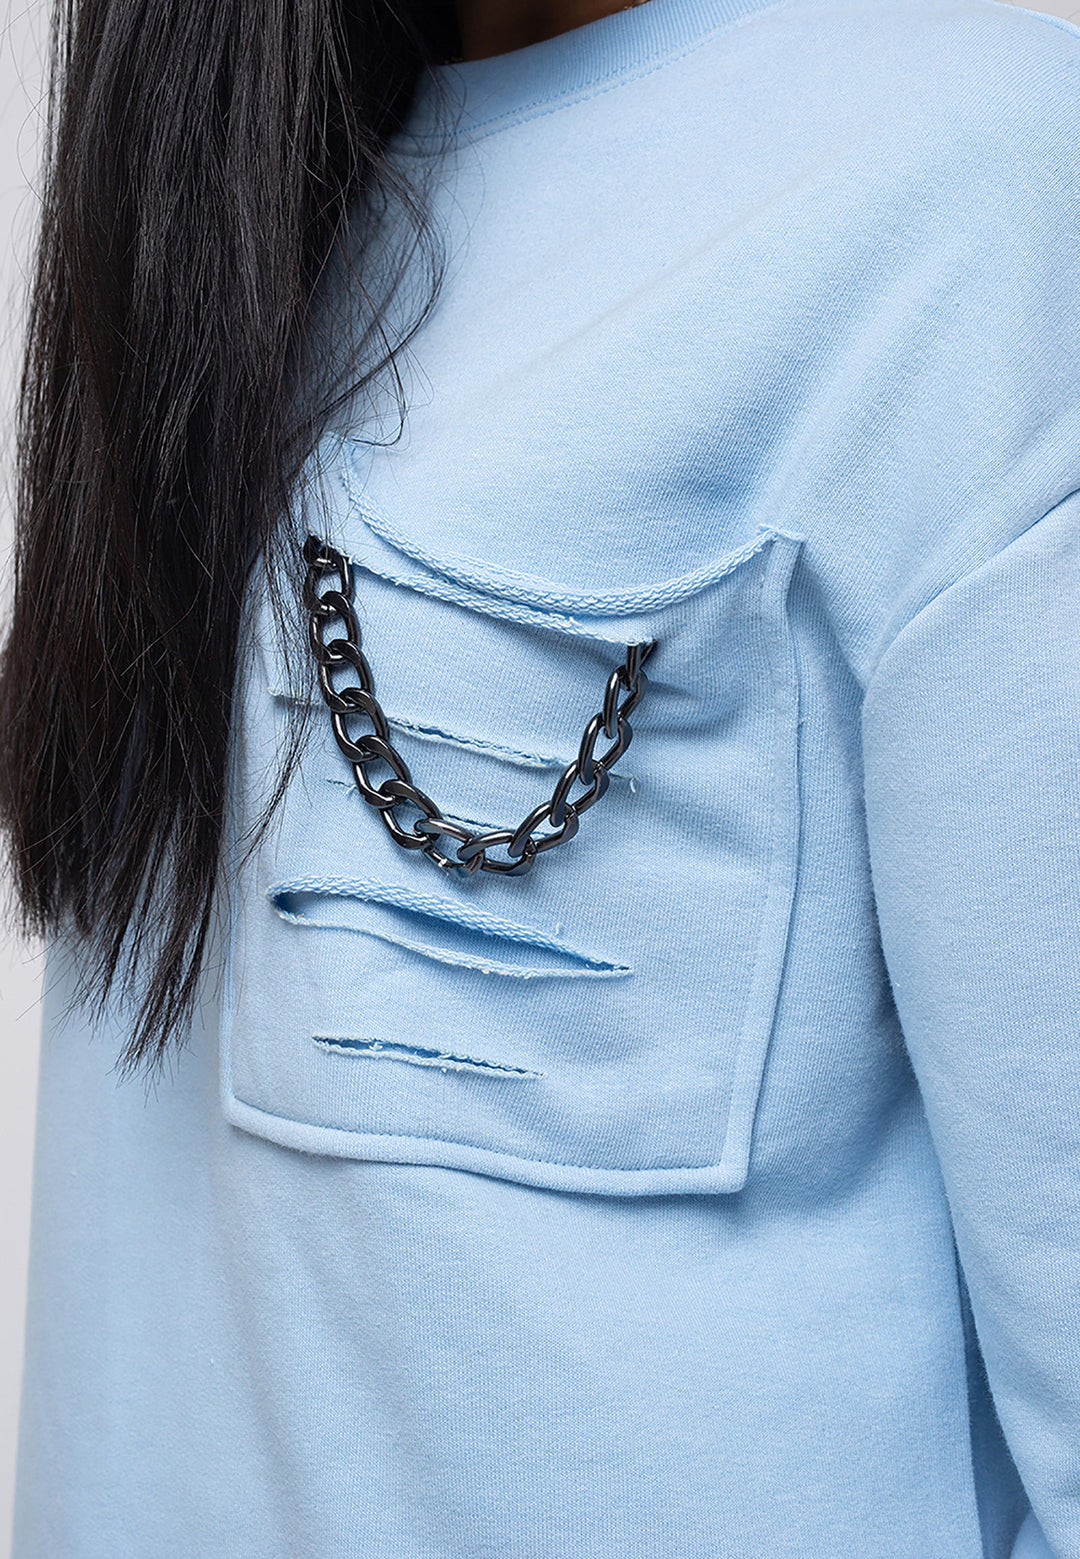 Tracksuit 'Chain